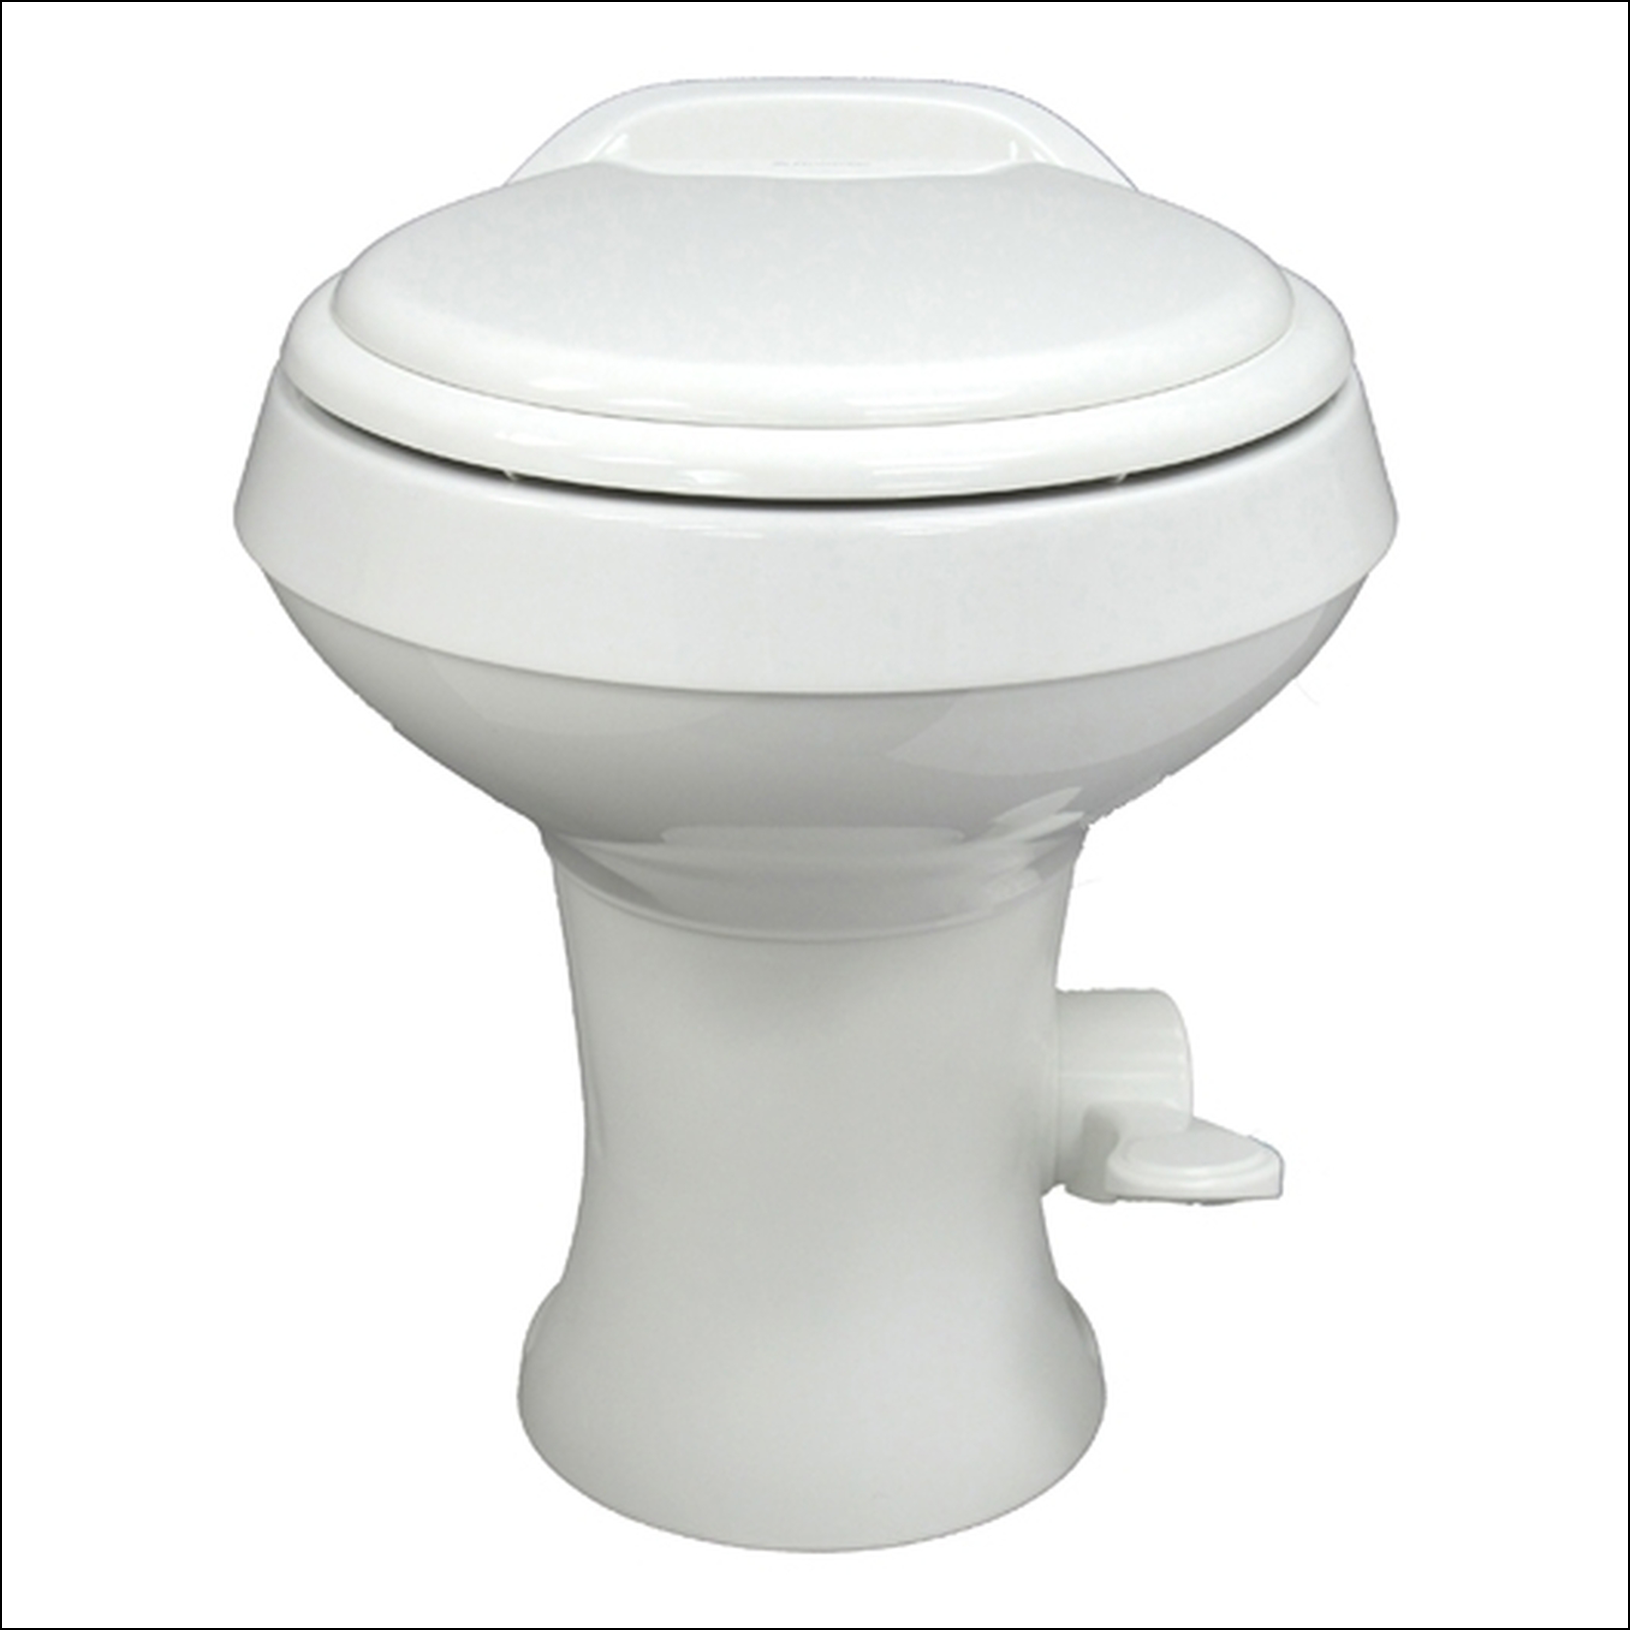 Toilet – White Standard Height Dometic 310